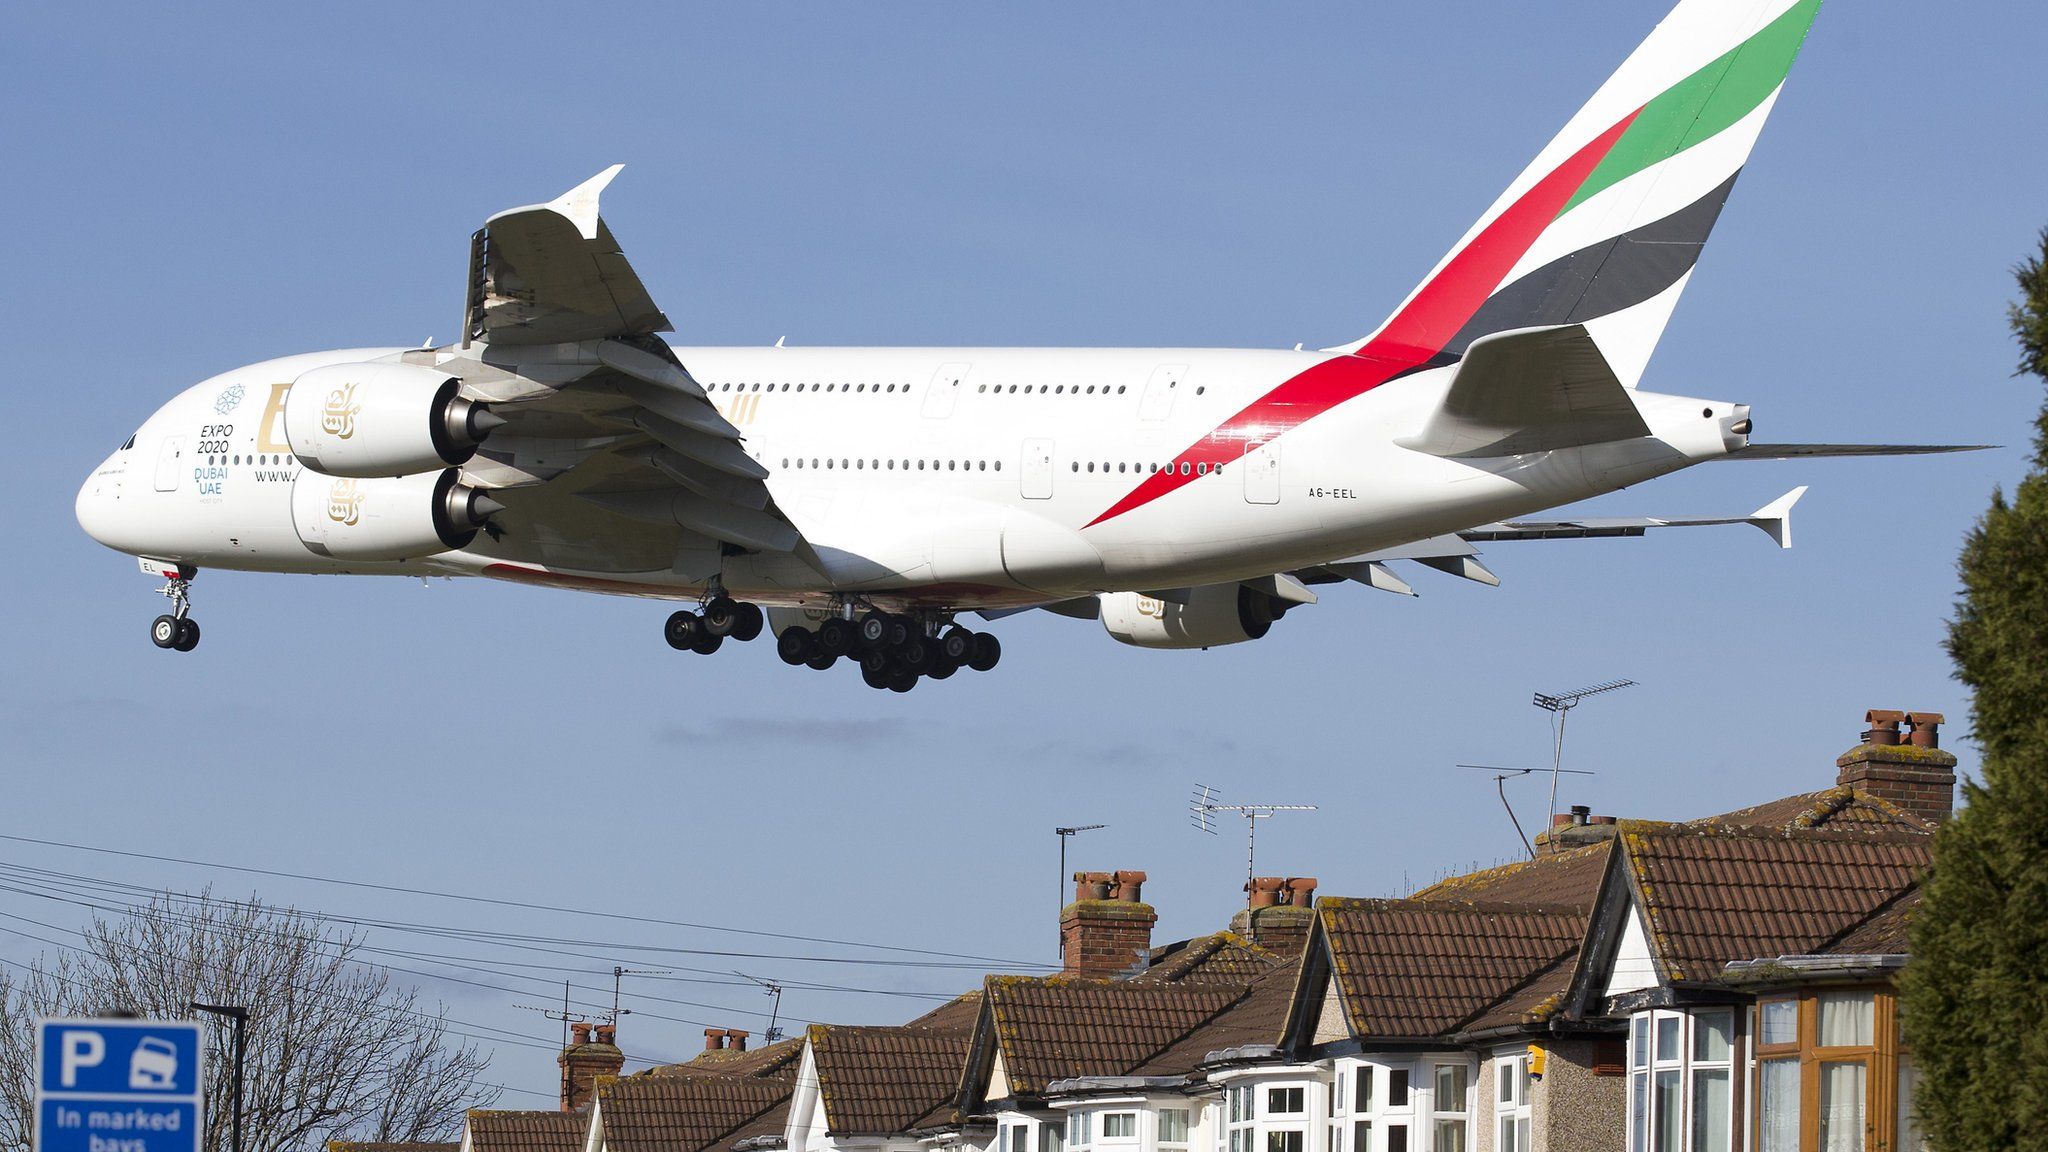 An Emirates Airbus A380 preparing to land at Heathrow Airport flies over houses in west London